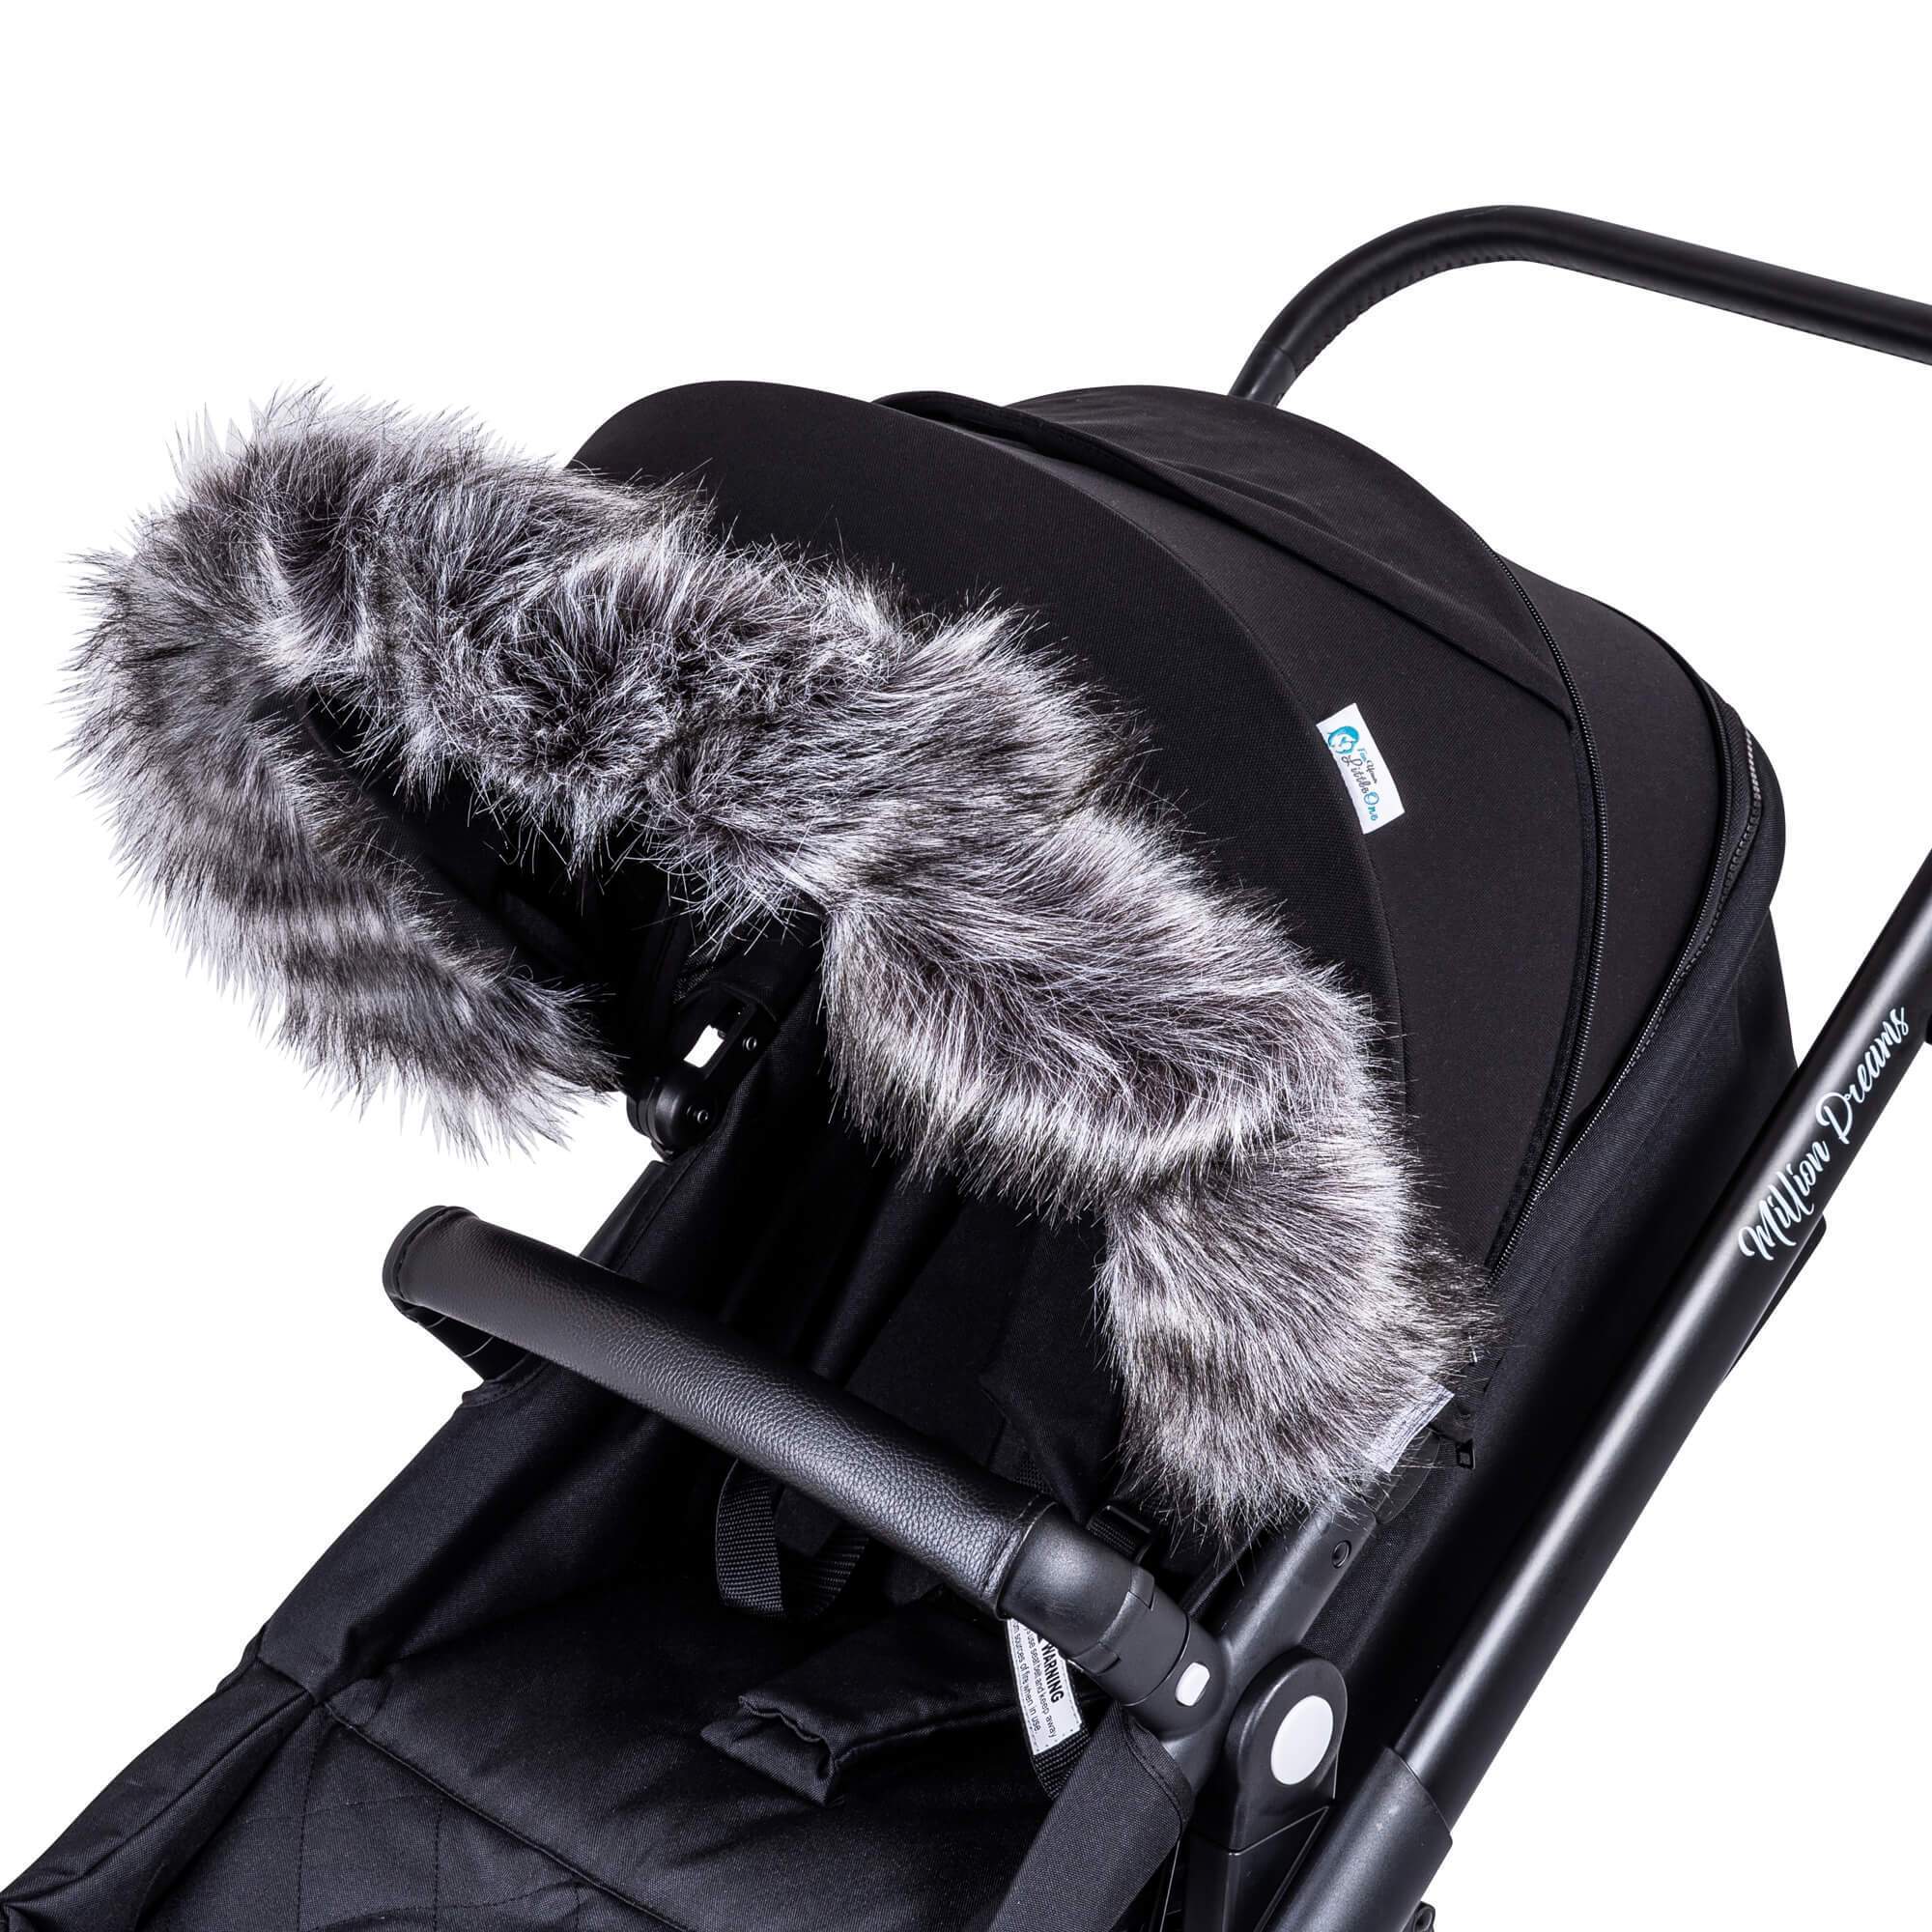 Pram Fur Hood Trim Attachment for Pushchair Compatible with Jane - For Your Little One